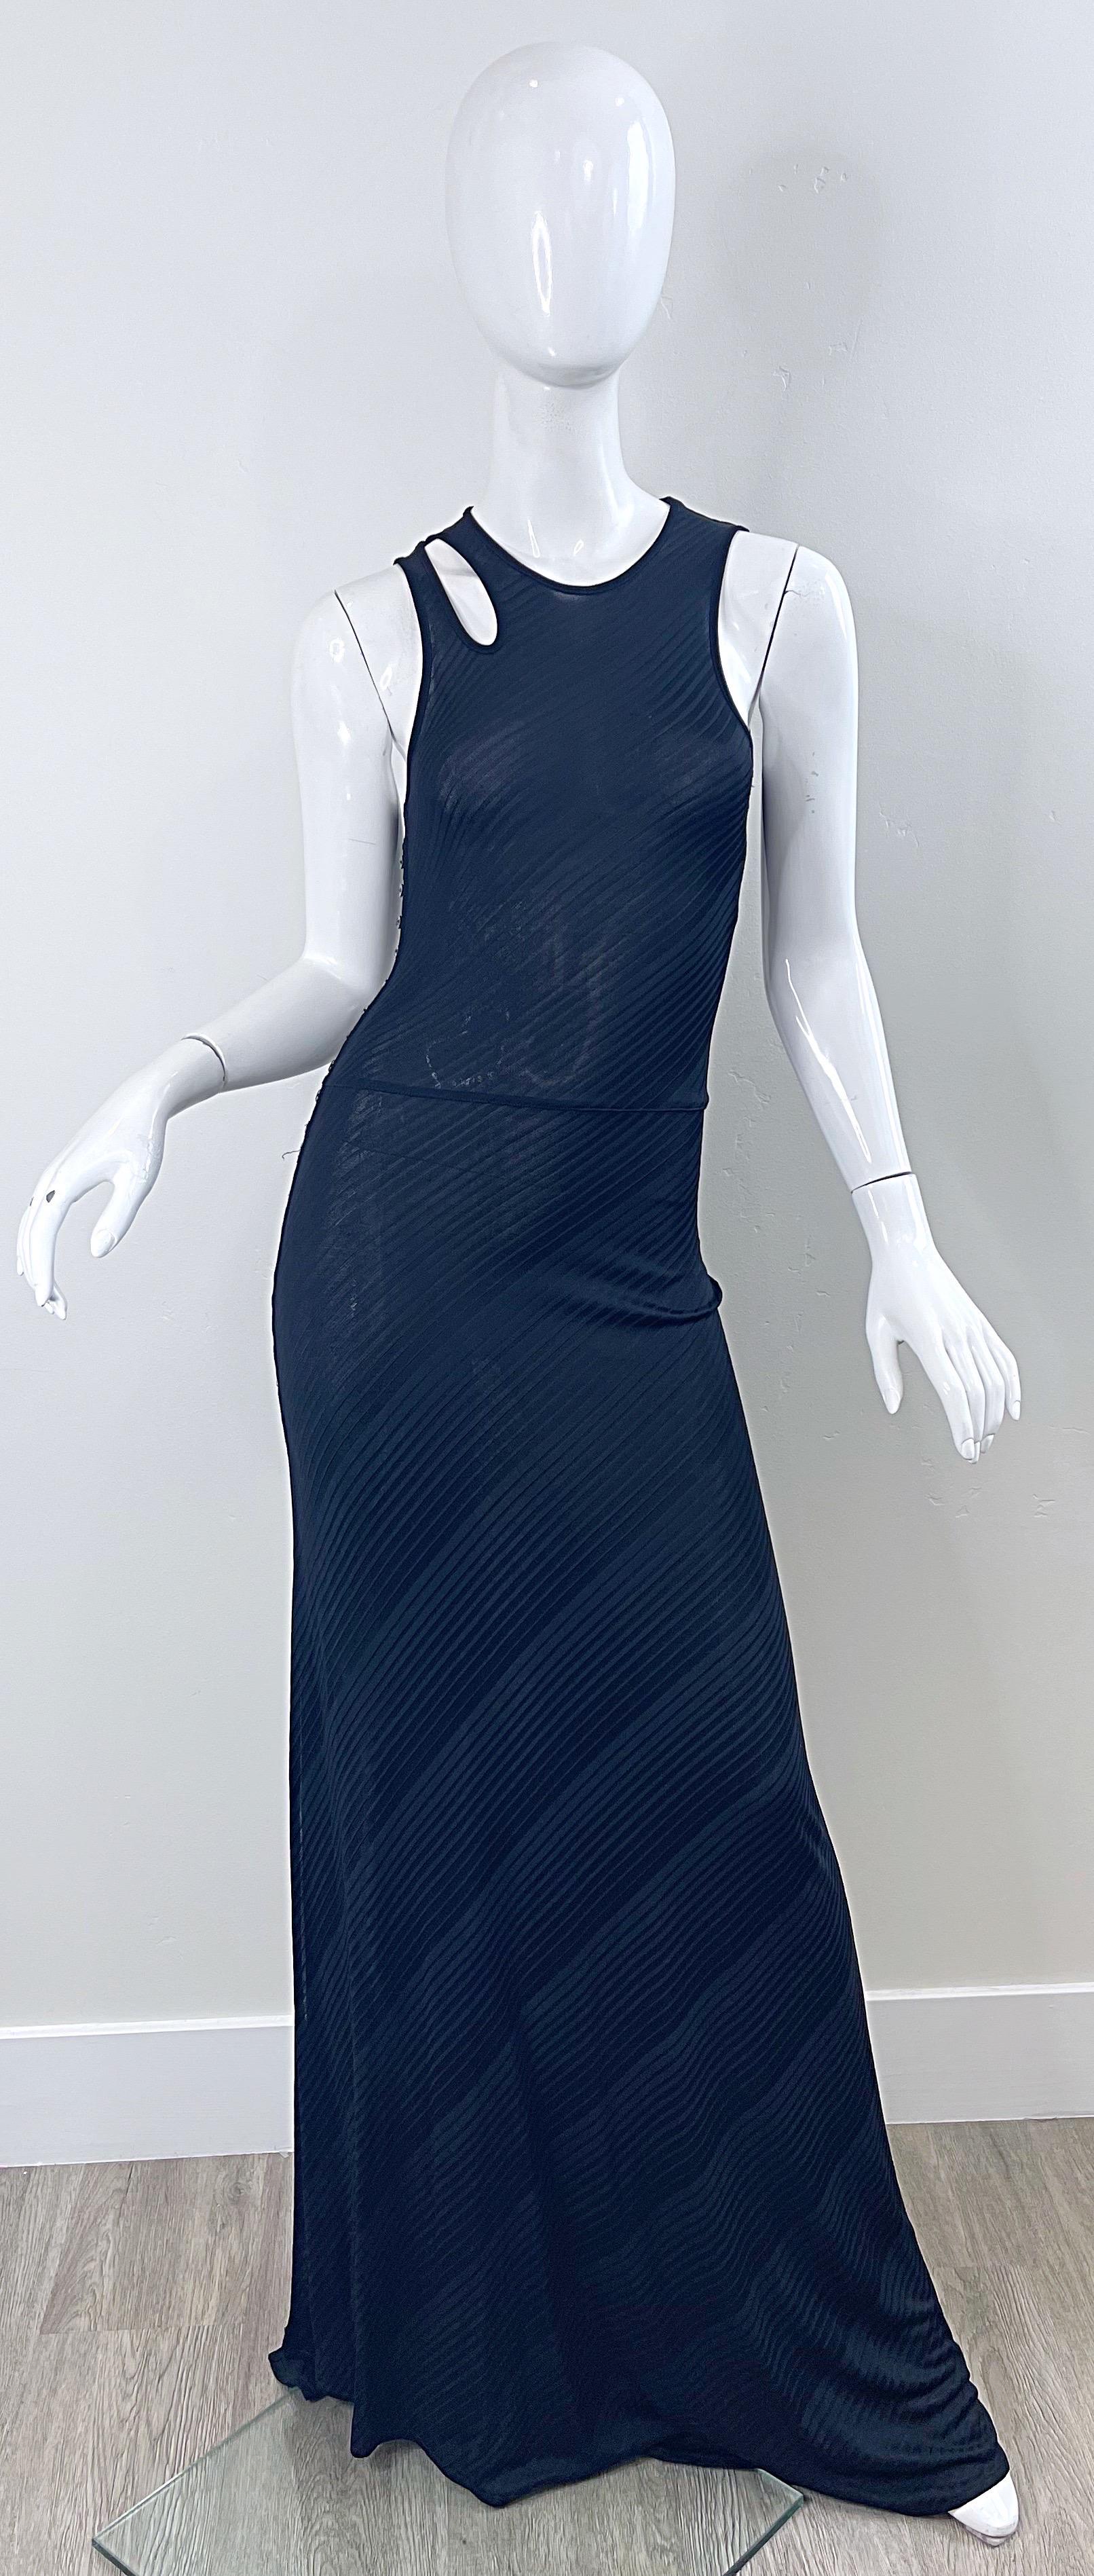 Gianni Versace Versus Spring 2001 Black Cut Out Sleeveless Vintage Jersey Gown  For Sale 9